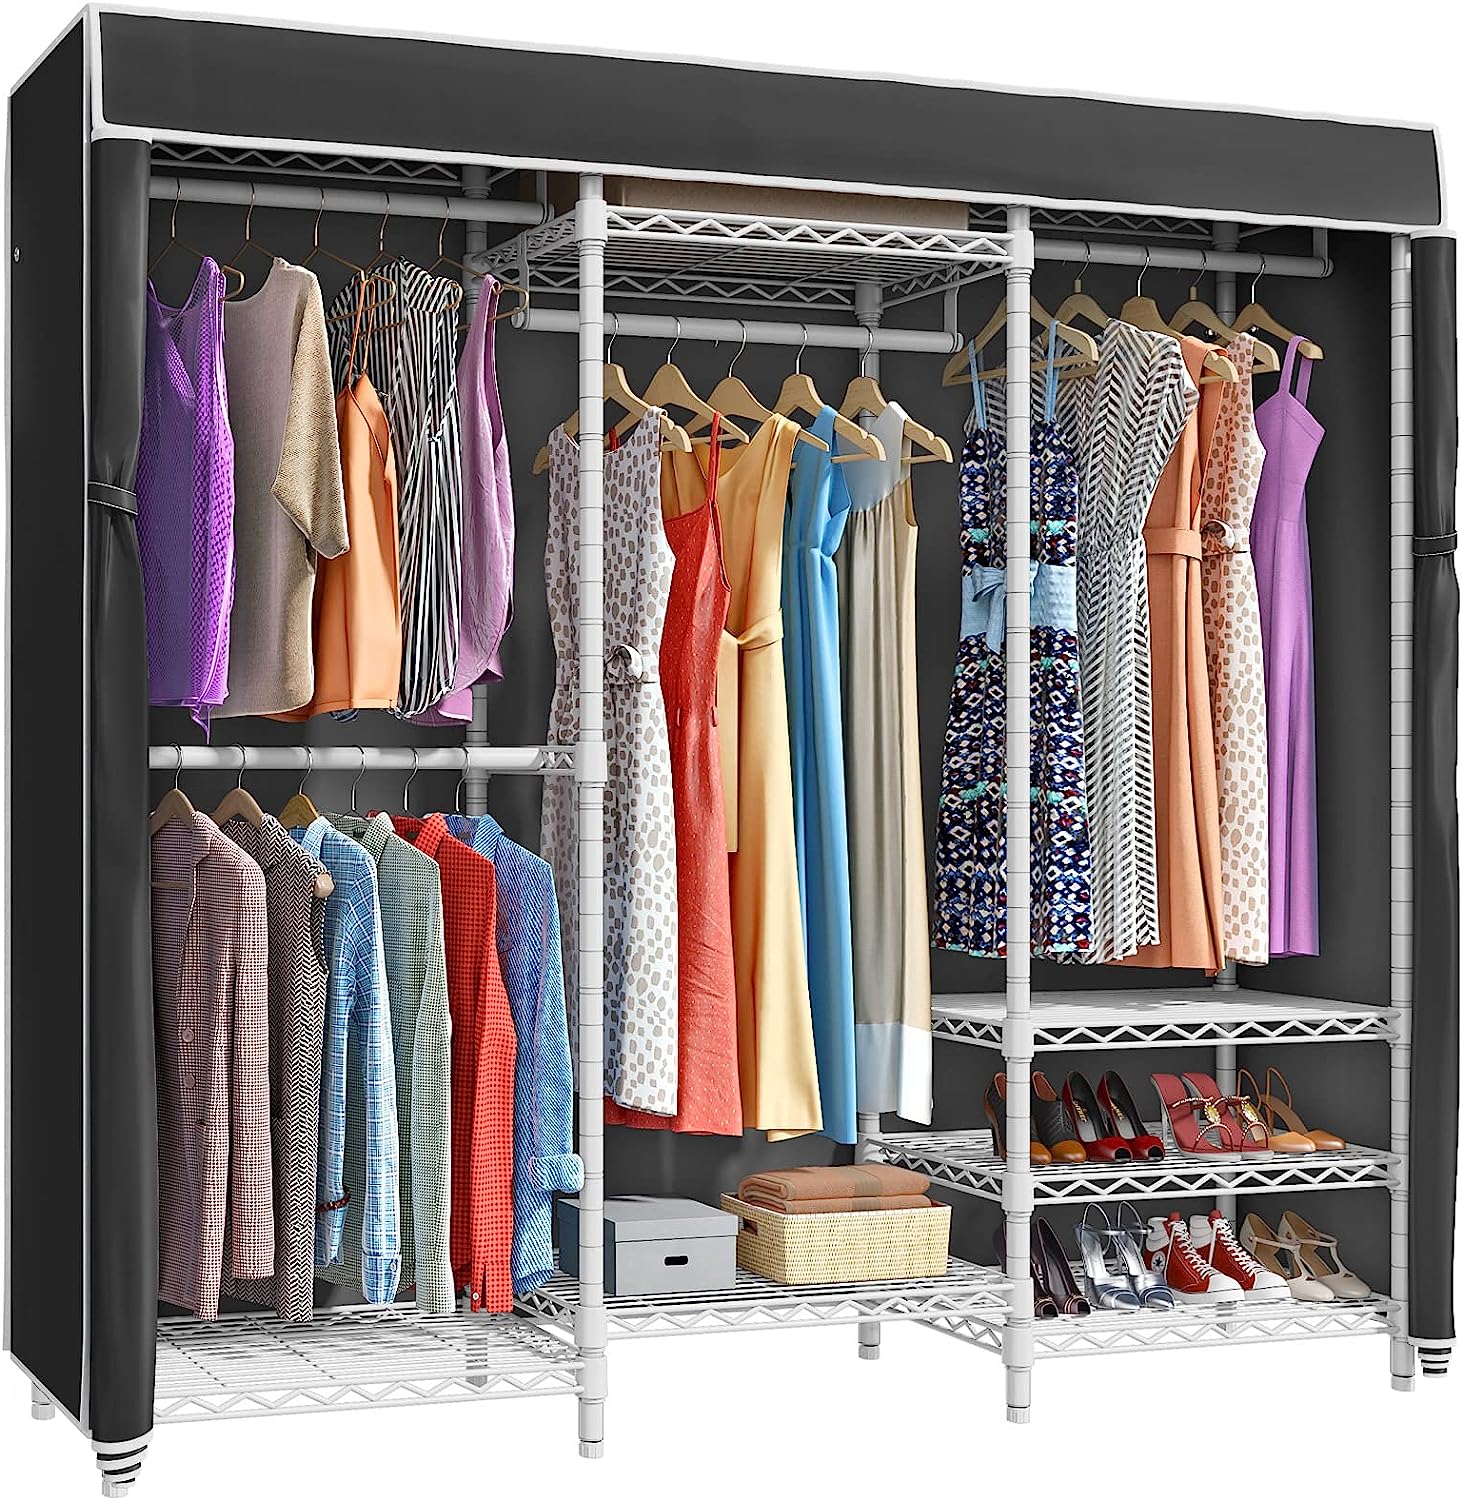 Blushbees® V5C Portable Clothes Closet Rack - White Metal with Black Cover